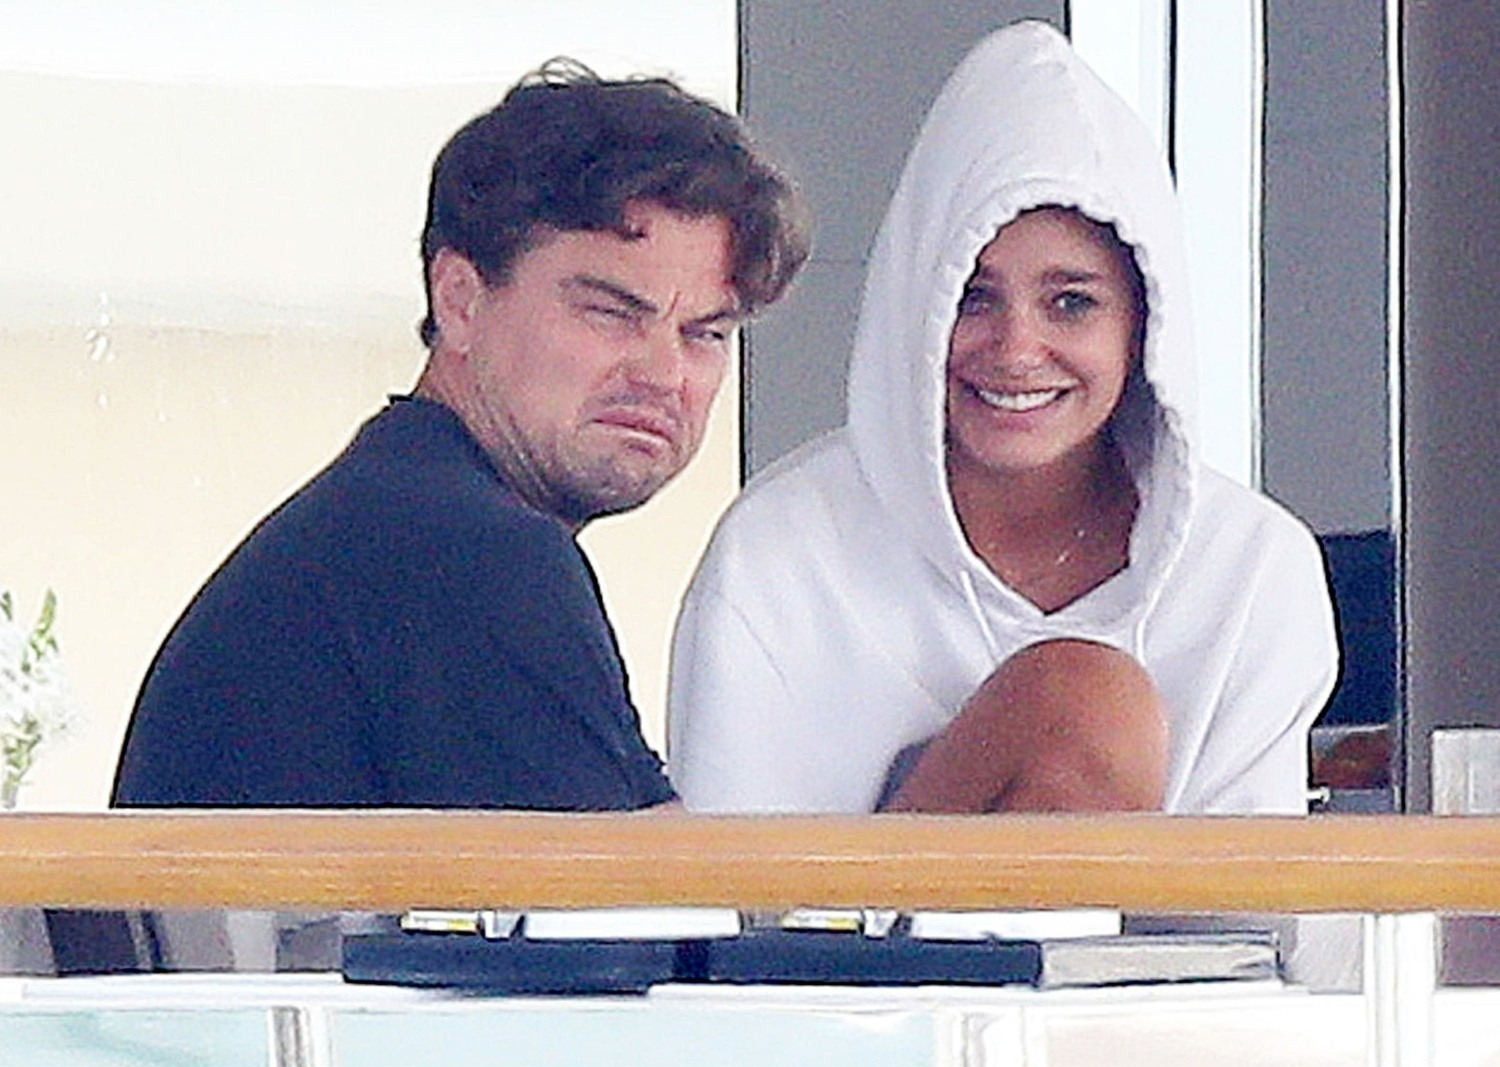 Leonardo DiCaprio has breakfast with new girlfriend Camille Morrone in Antibes